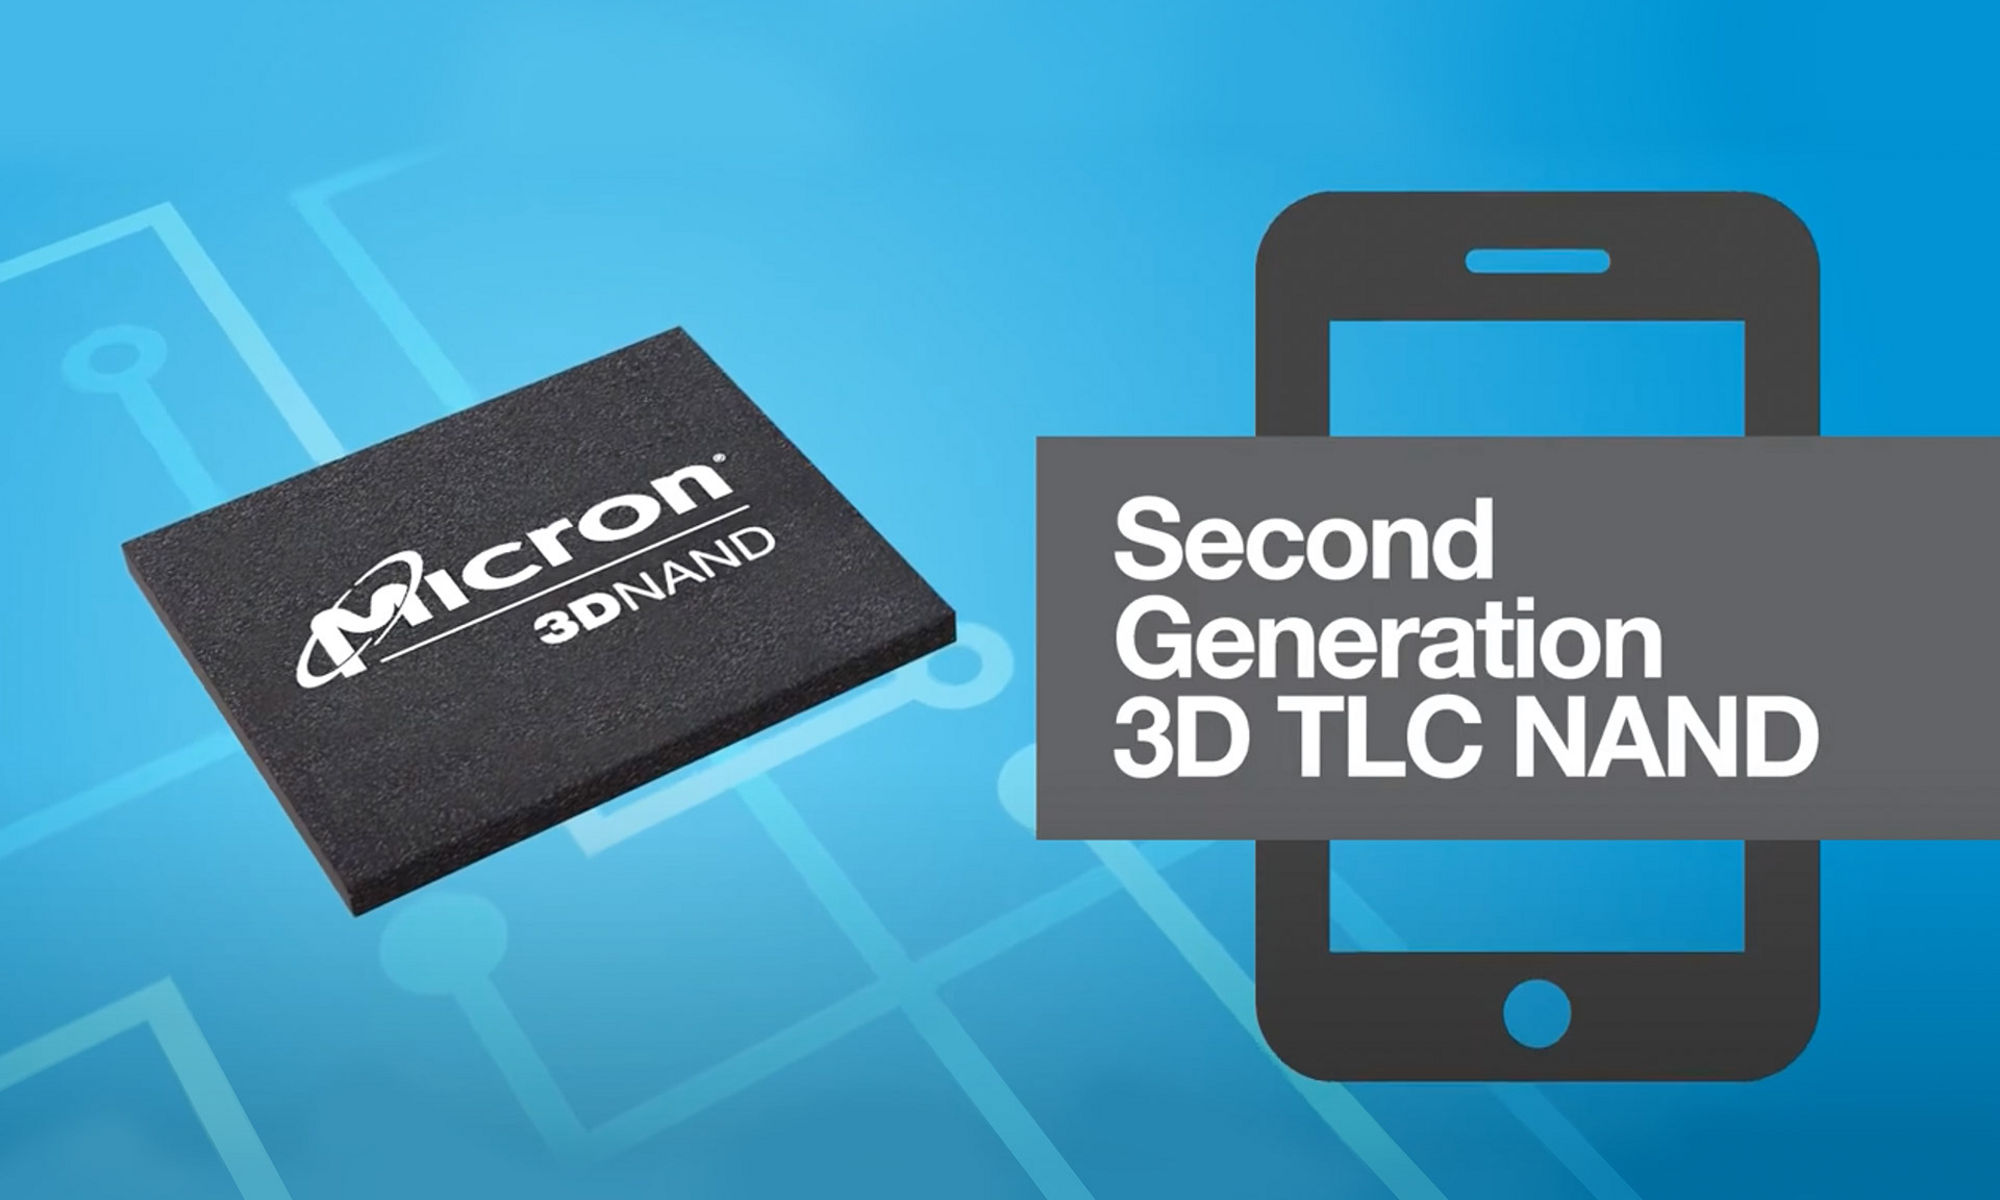 A Micron 3D NAND device and icon of a mobile phone labeled Second Generation 3D TLC NAND